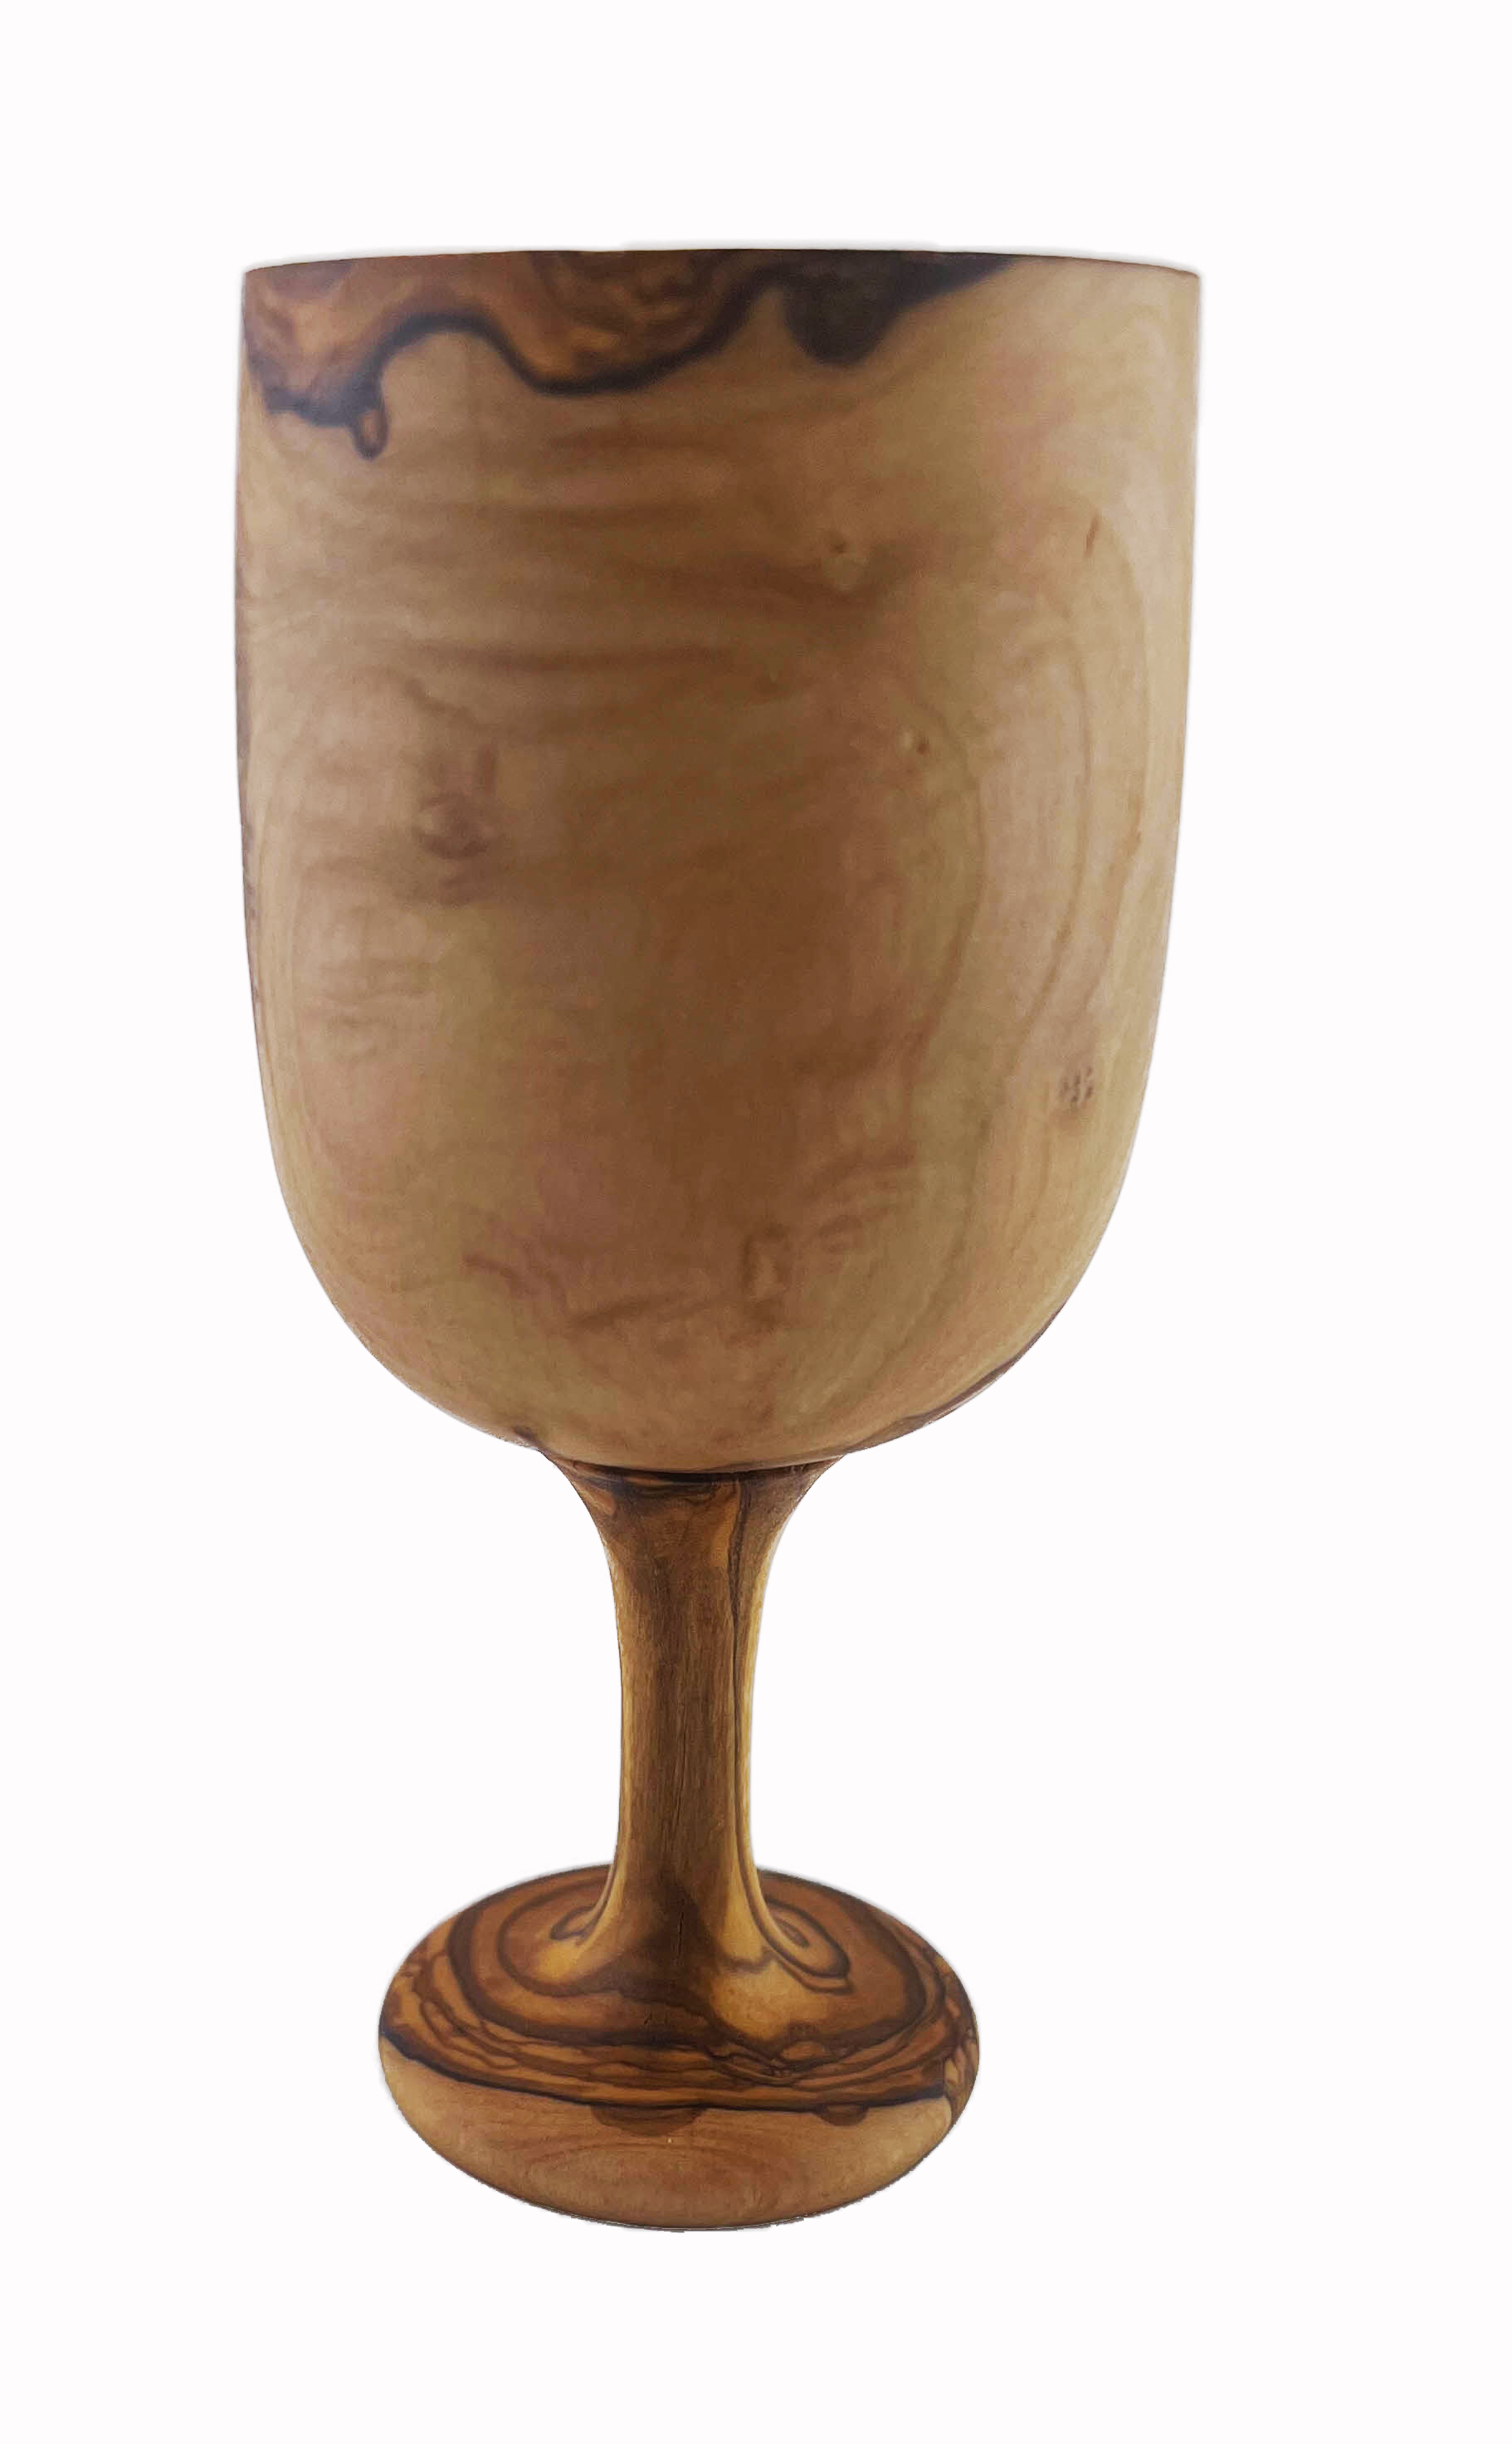 Drinking cup made of olive wood, 15 cm tall.